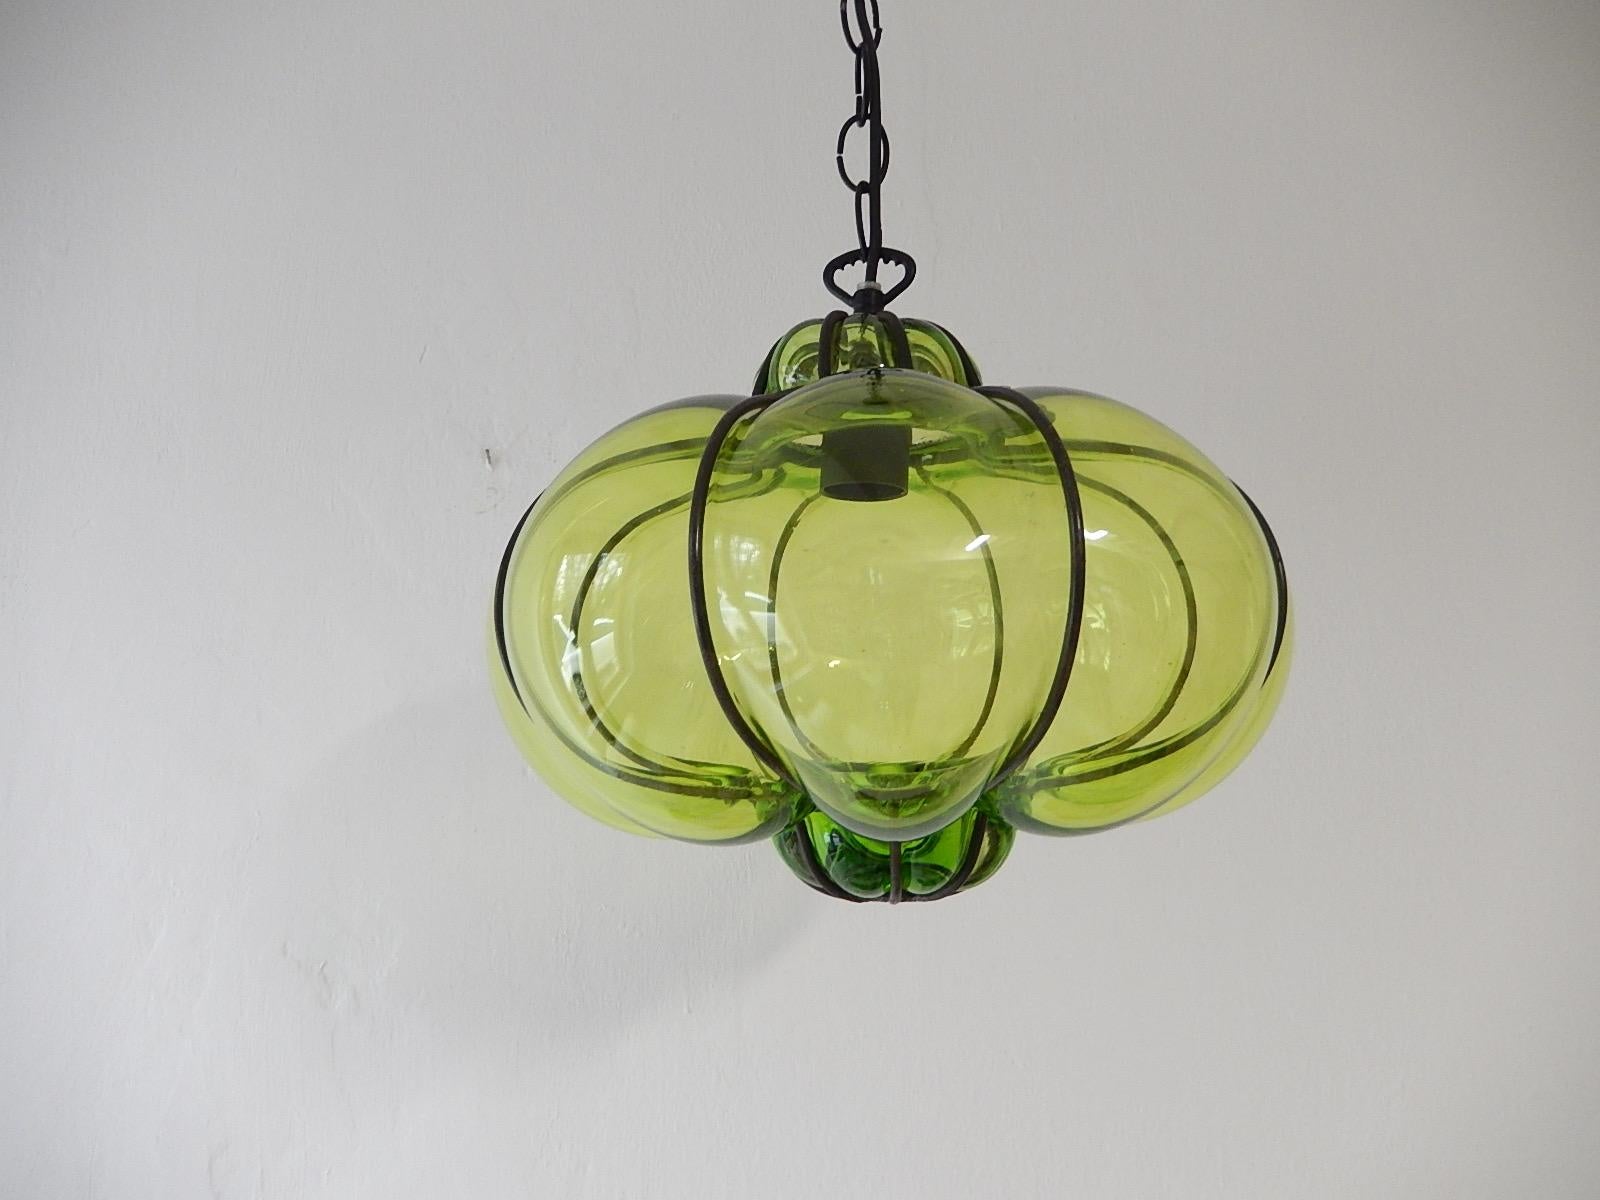 Housing one-light. Rare green Murano blown glass. Great craftsmanship. Re-wired and ready to hang with appropriate socket. Rare shape. Free priority UPS shipping from Italy, no custom fees. Adding another 20 inches of original chain and canopy.